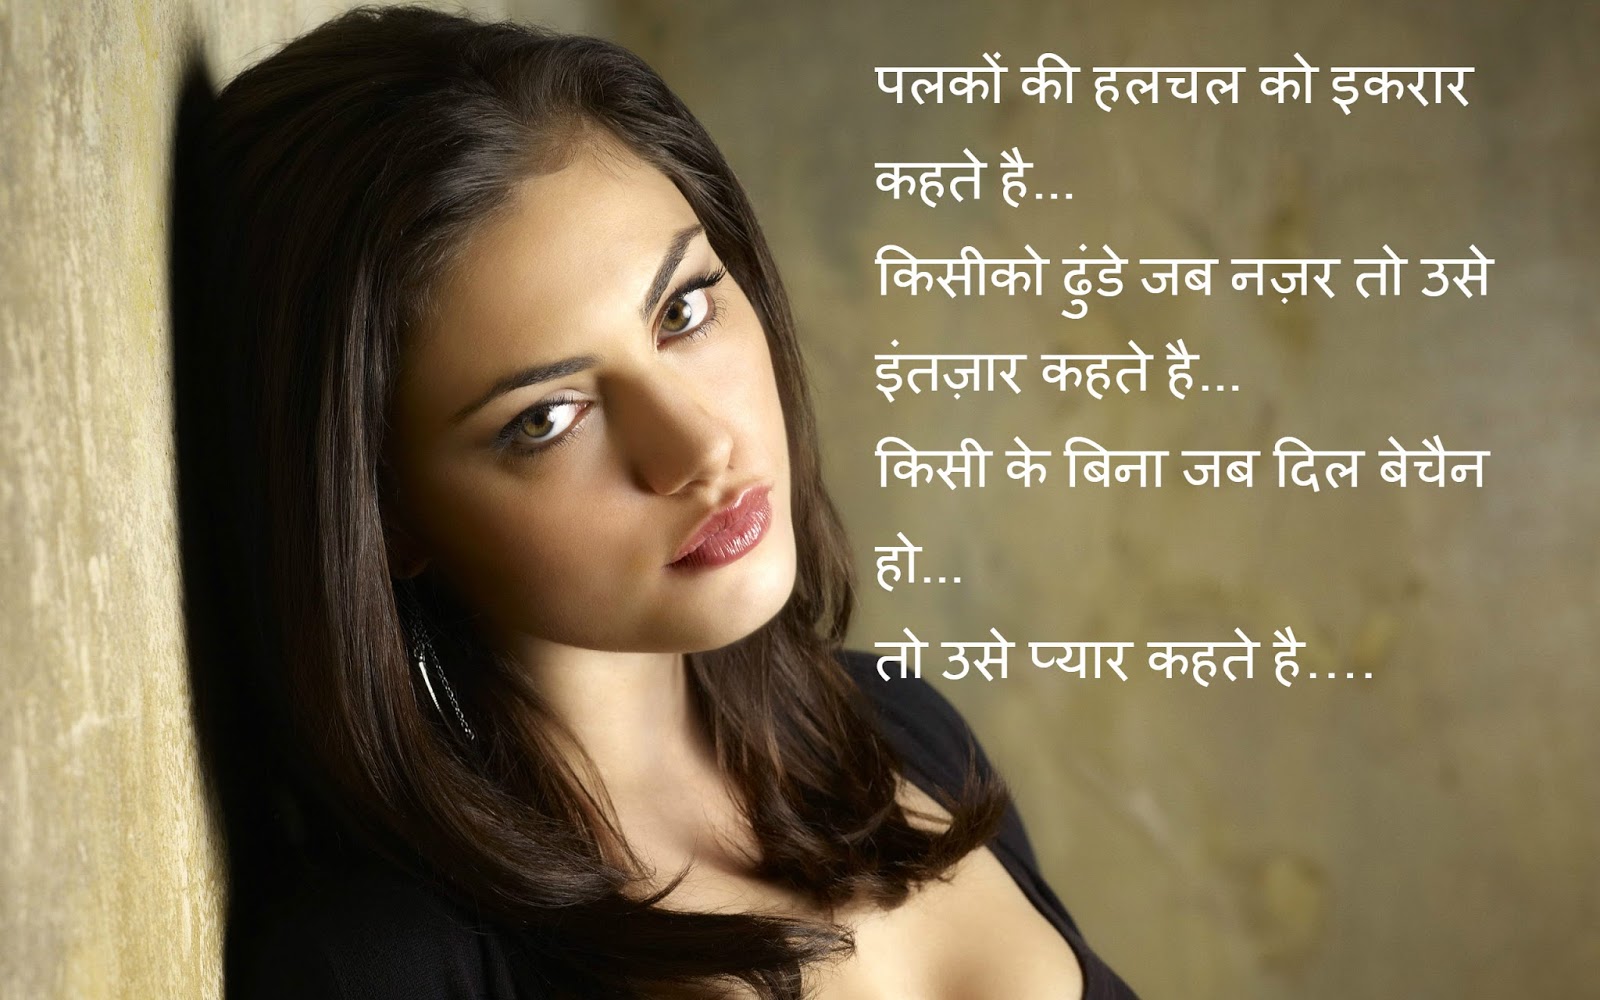 Best 30 Collection of Hindi Shayari for whatsapp Best & Latest Romantic Love Shayari Sms Messages in Hindi for Gf Bf with Lovely Pics